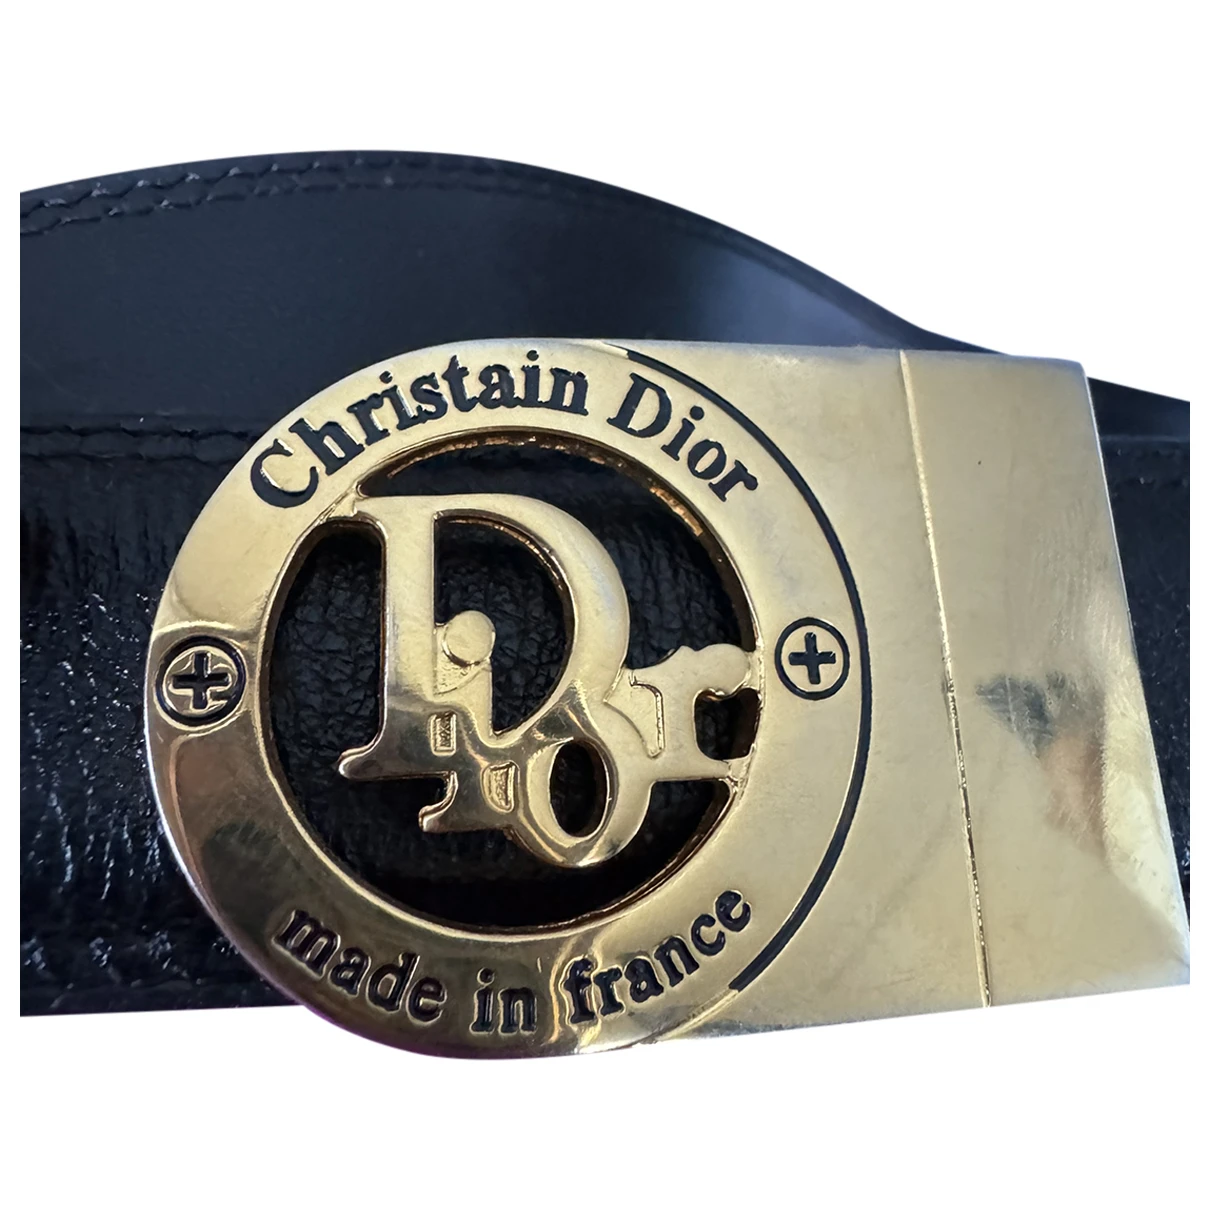 Pre-owned Dior Leather Belt In Black